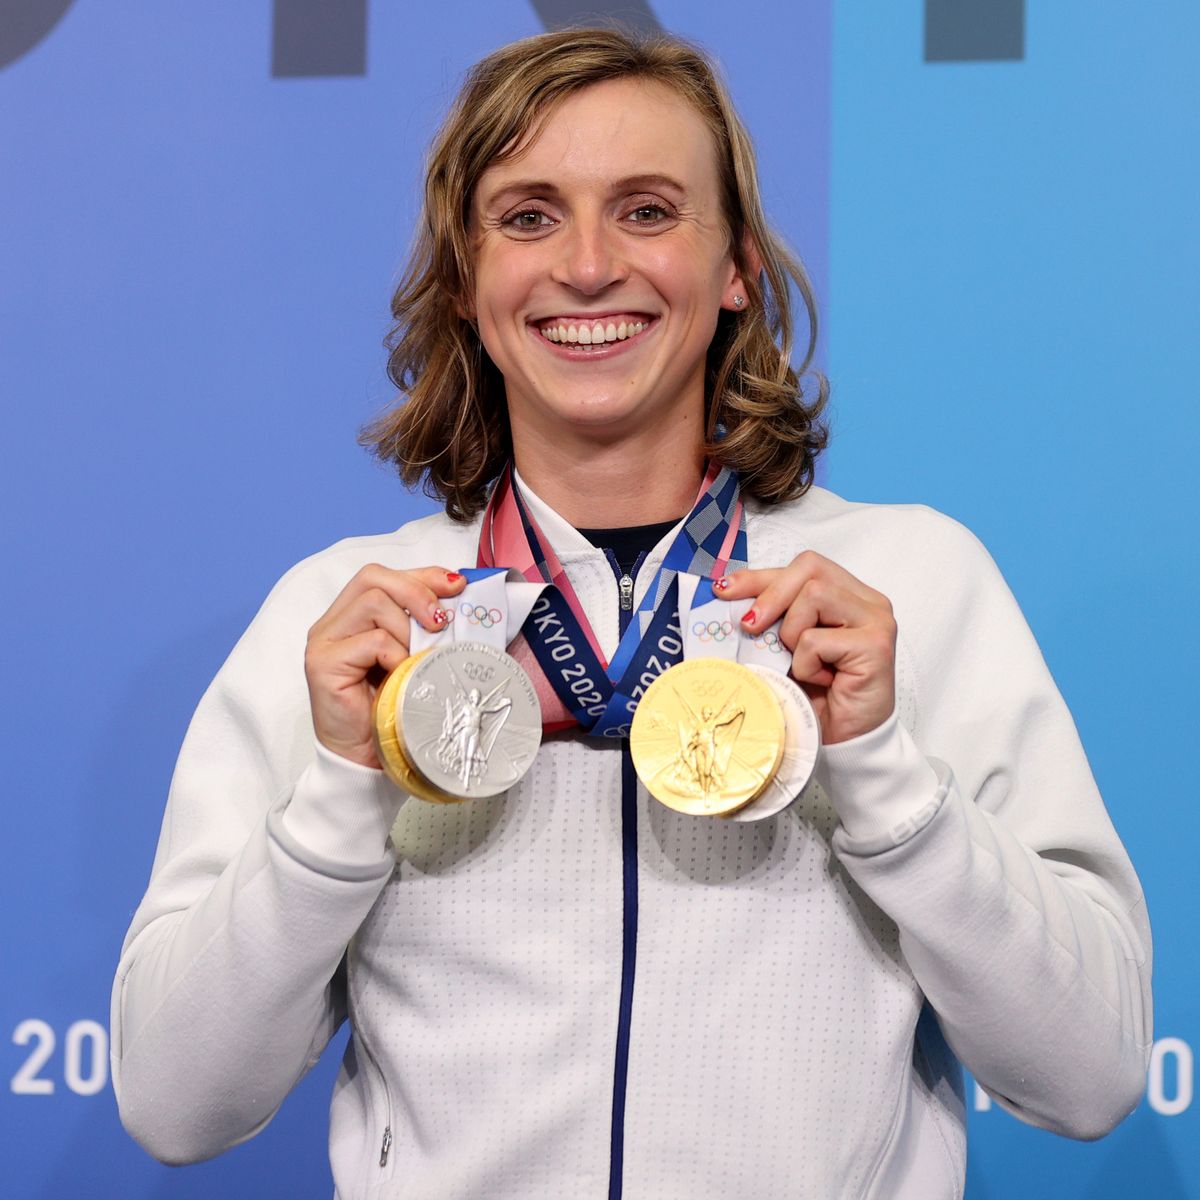 Katie Ledecky Husband And Kids: Is She Married Or Dating Anyone?